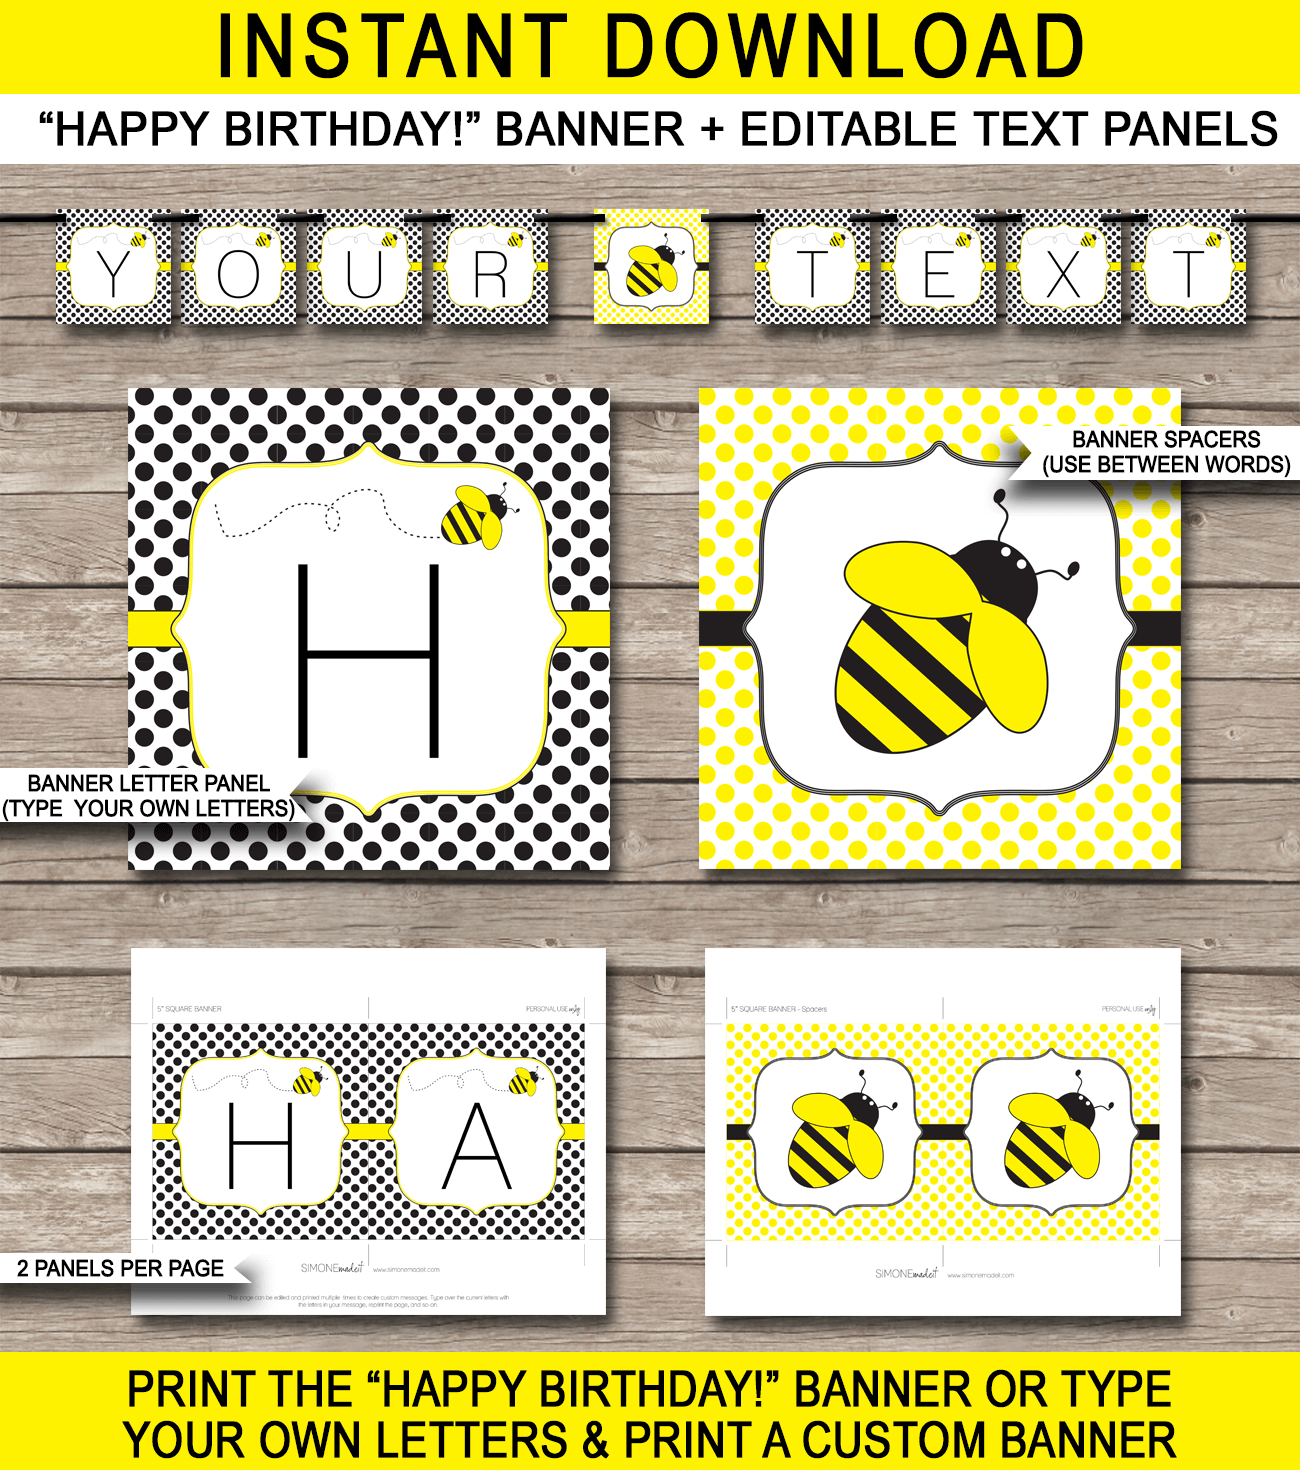 Bee Party Banner Template - Bee Bunting - Happy Birthday Banner - Birthday Party - Editable and Printable DIY Template - INSTANT DOWNLOAD $4.50 via simonemadeit.com